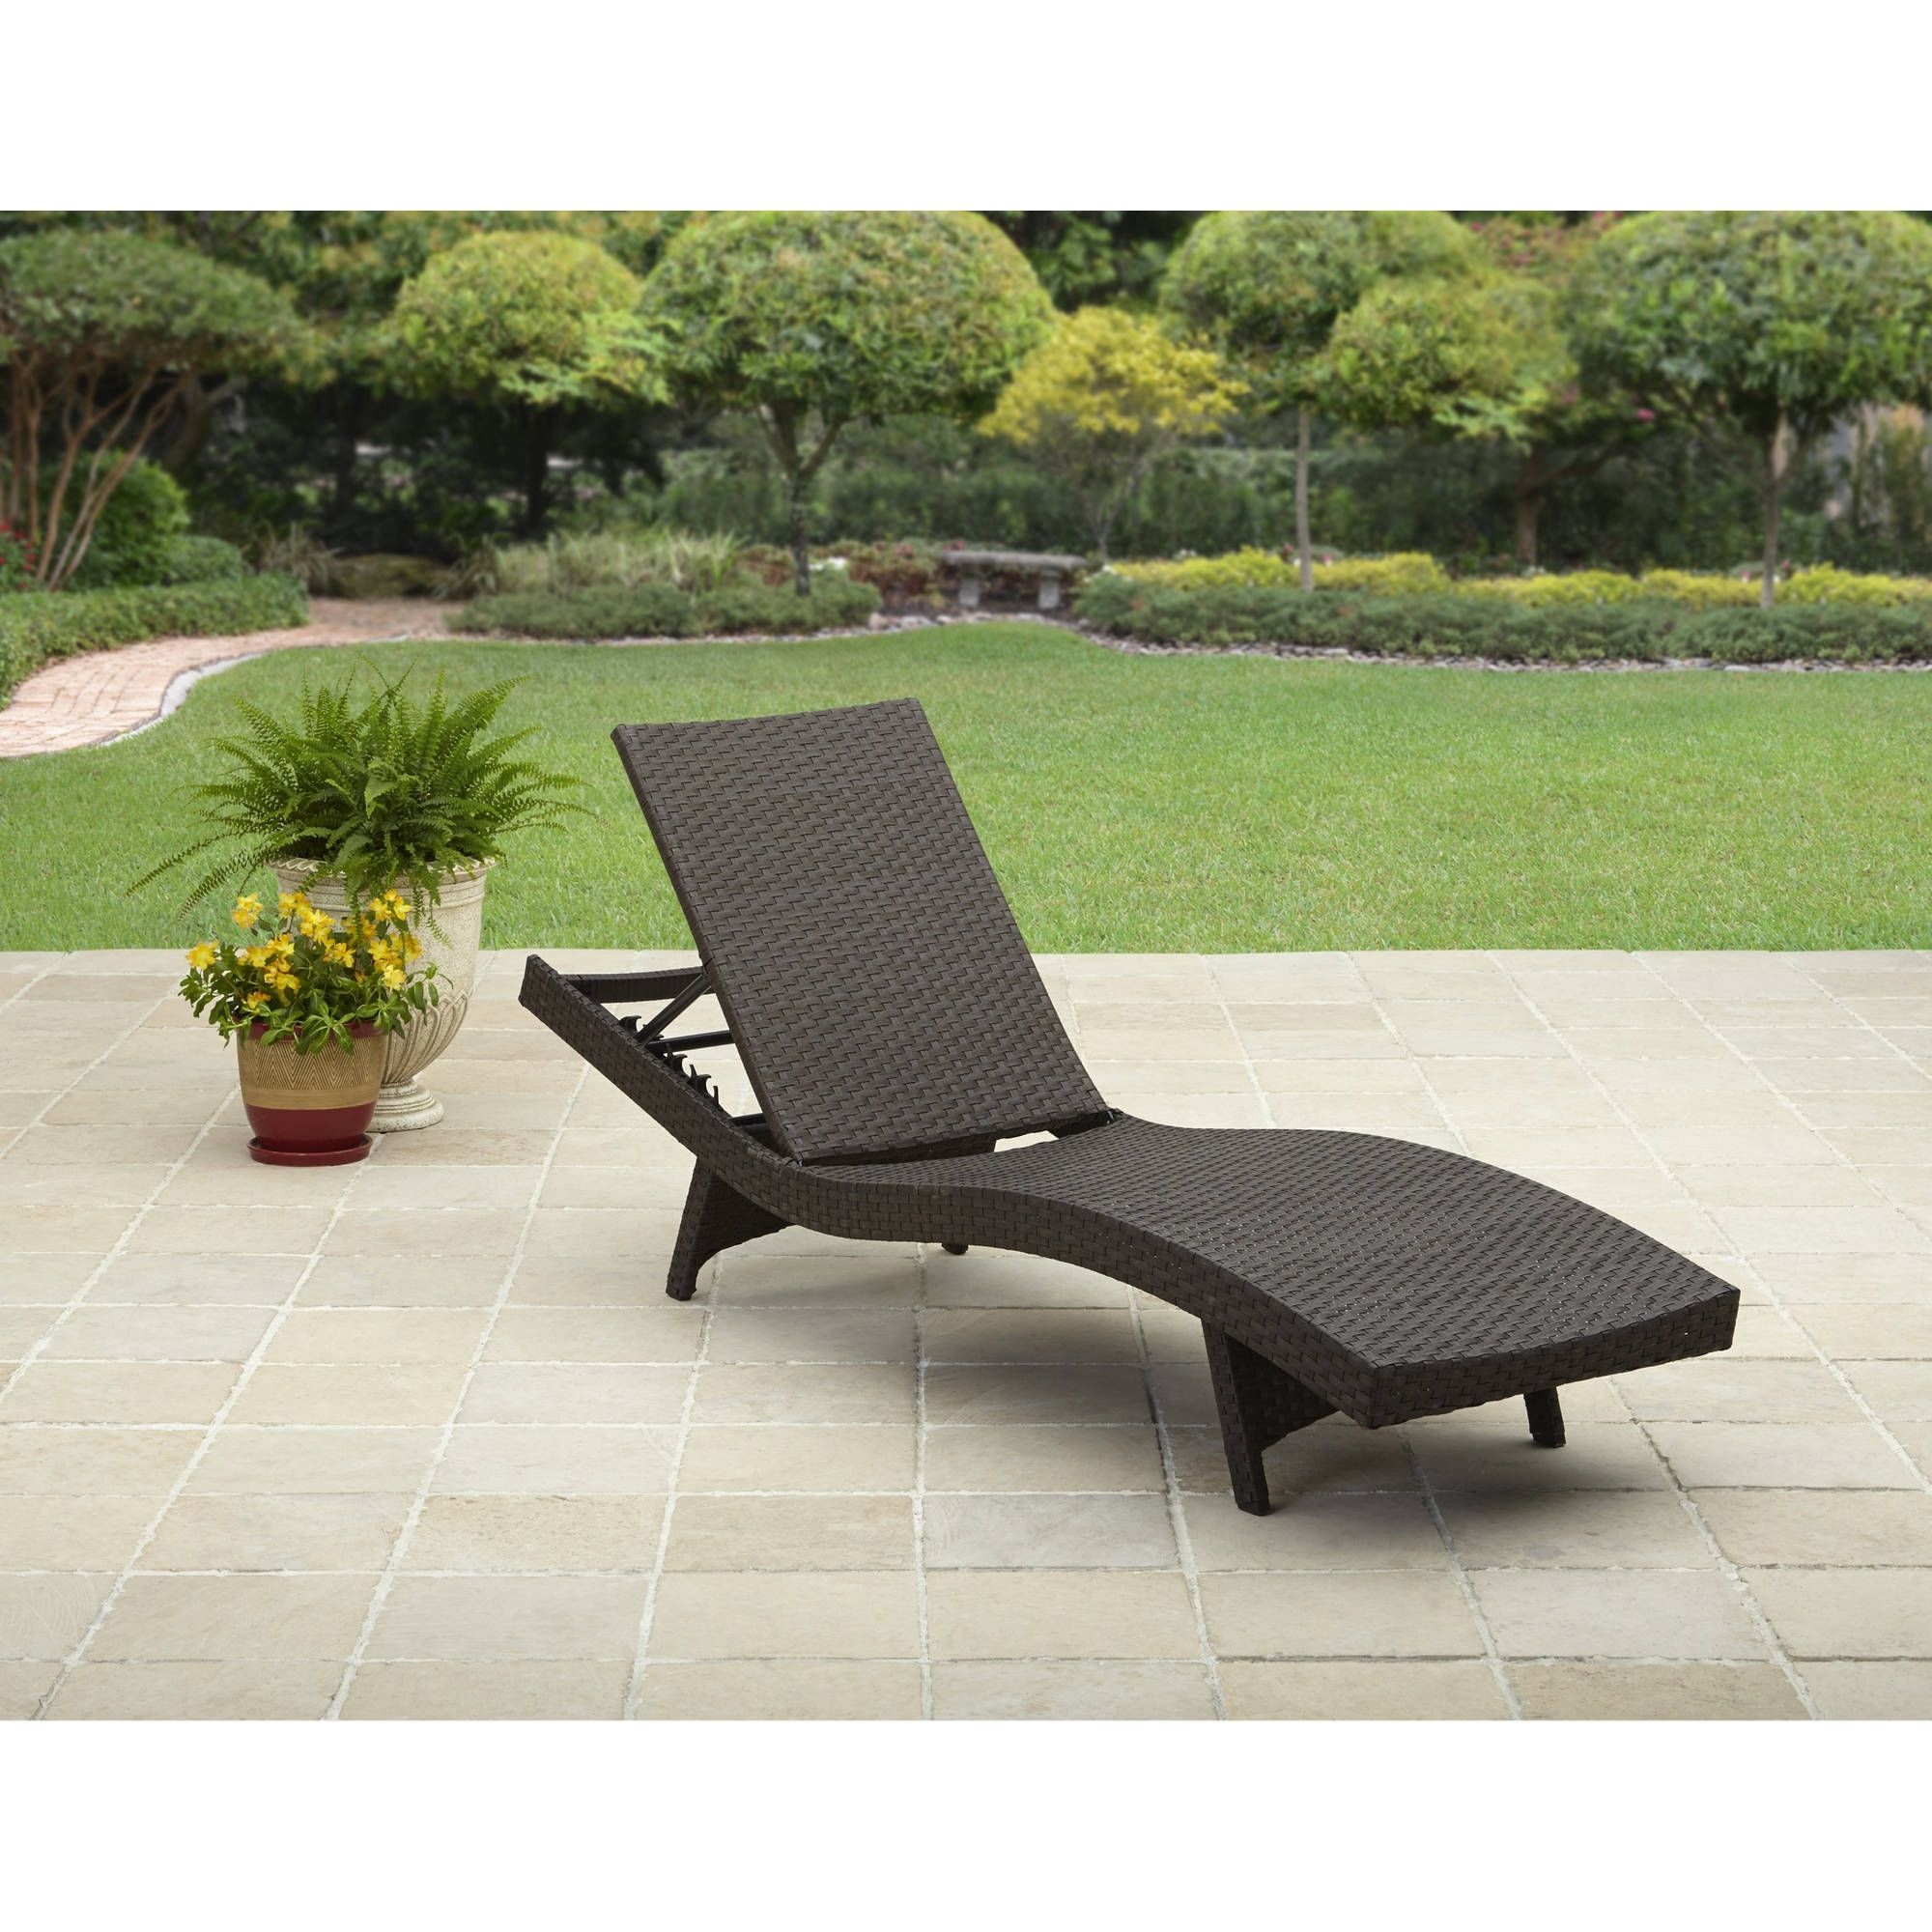 Better Homes And Gardens Avila Beach Chaise – Walmart In Favorite Outdoor Chaise Lounge Chairs At Walmart (View 1 of 15)